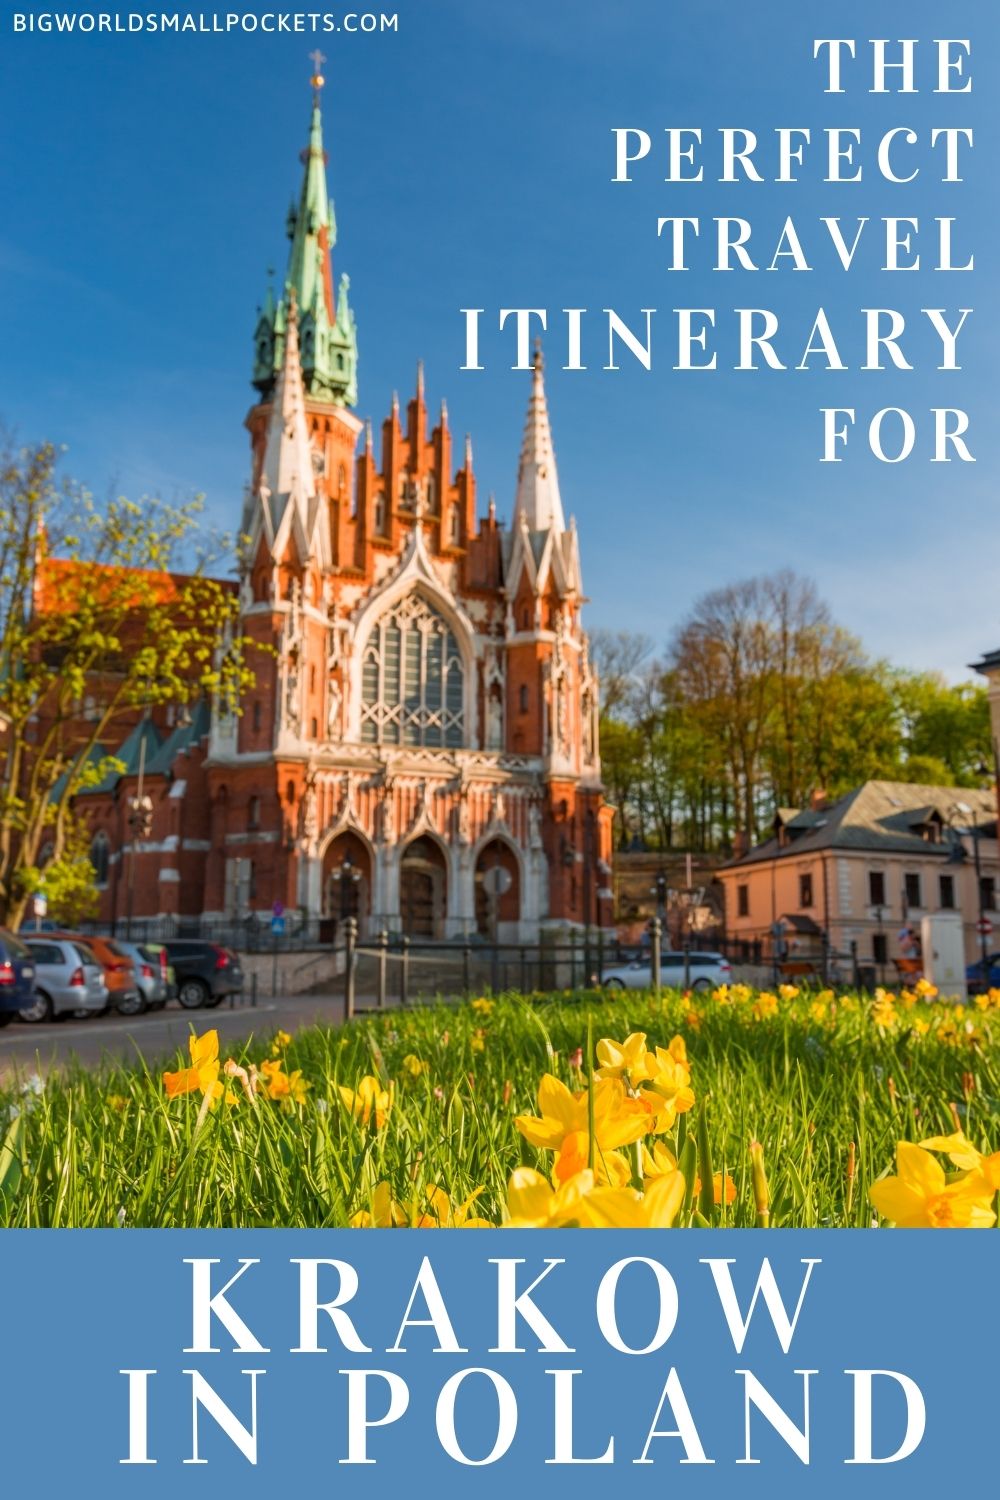 The Perfect Krakow Itinerary